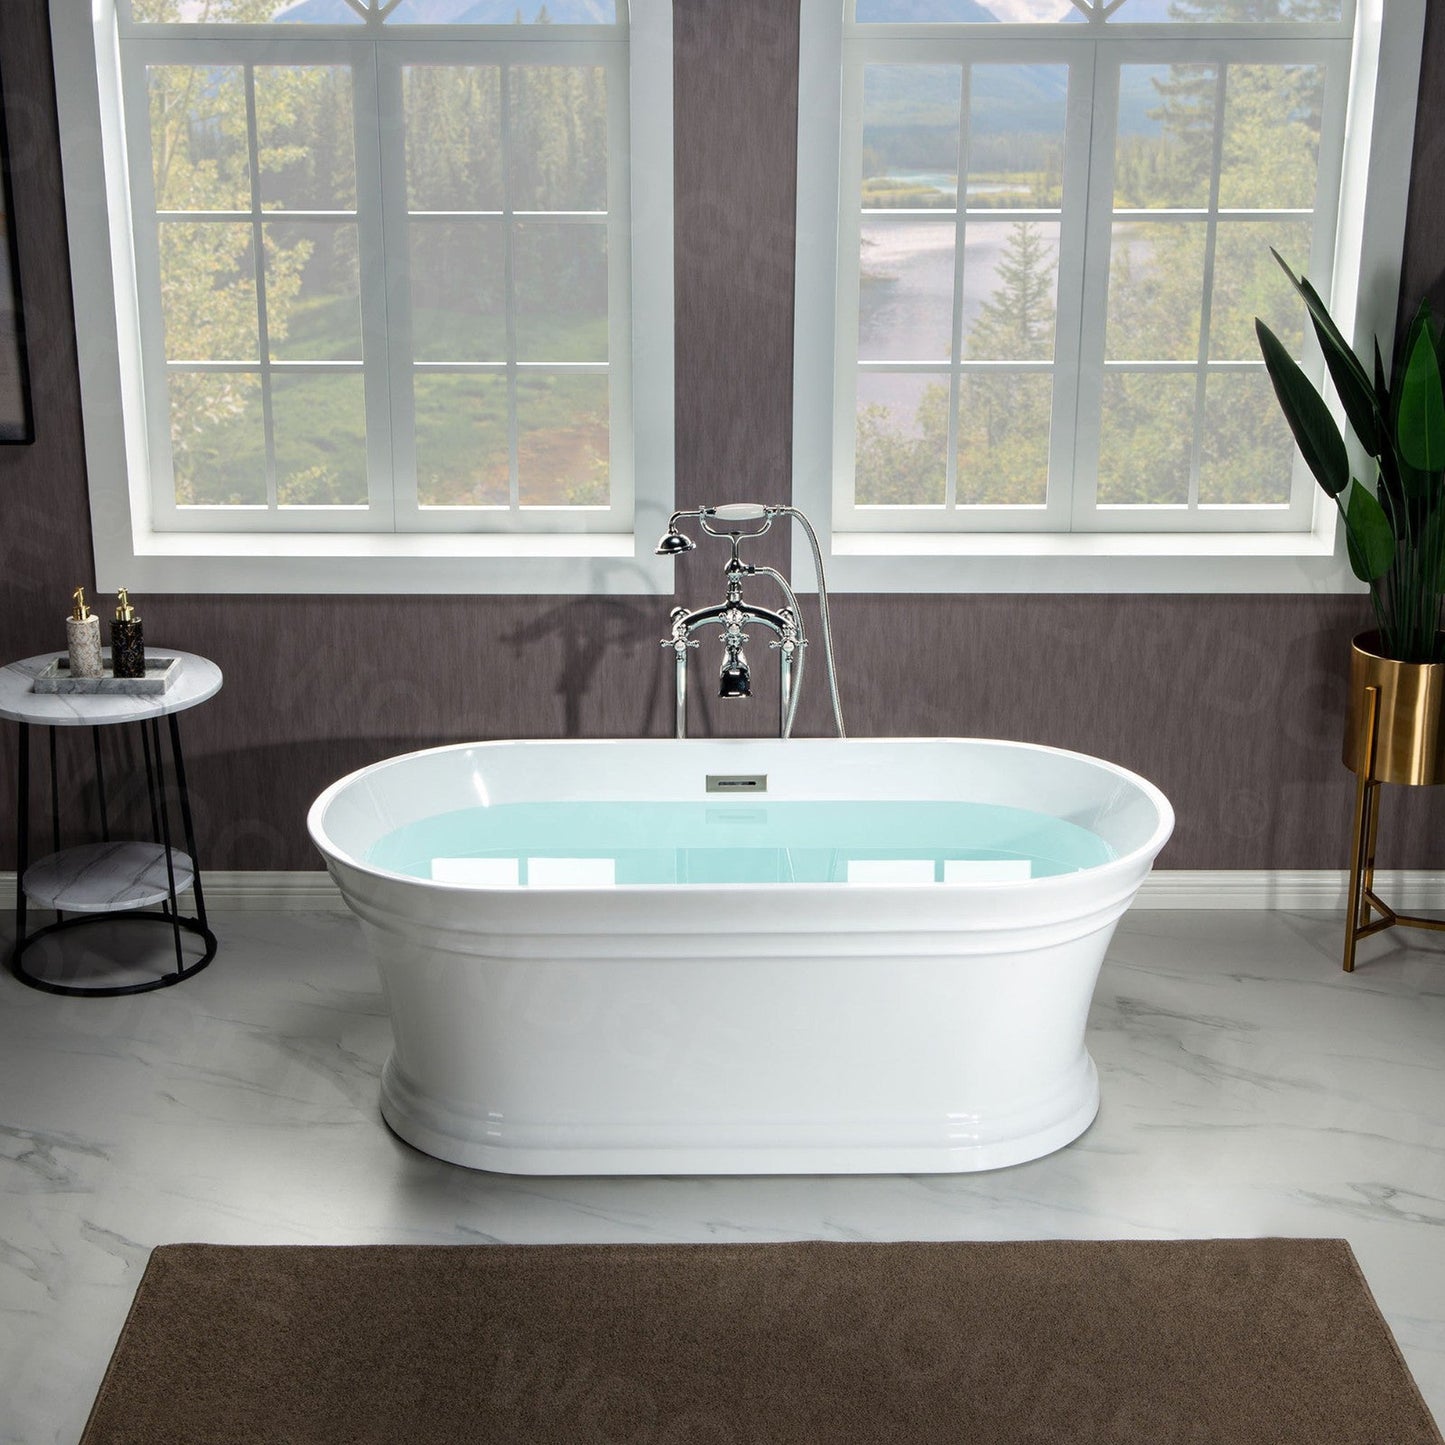 WoodBridge 67" Glossy White Lucite Acrylic Freestanding Double Ended Soaking Bathtub With Brushed Nickel Center Drain Assembly and Overflow